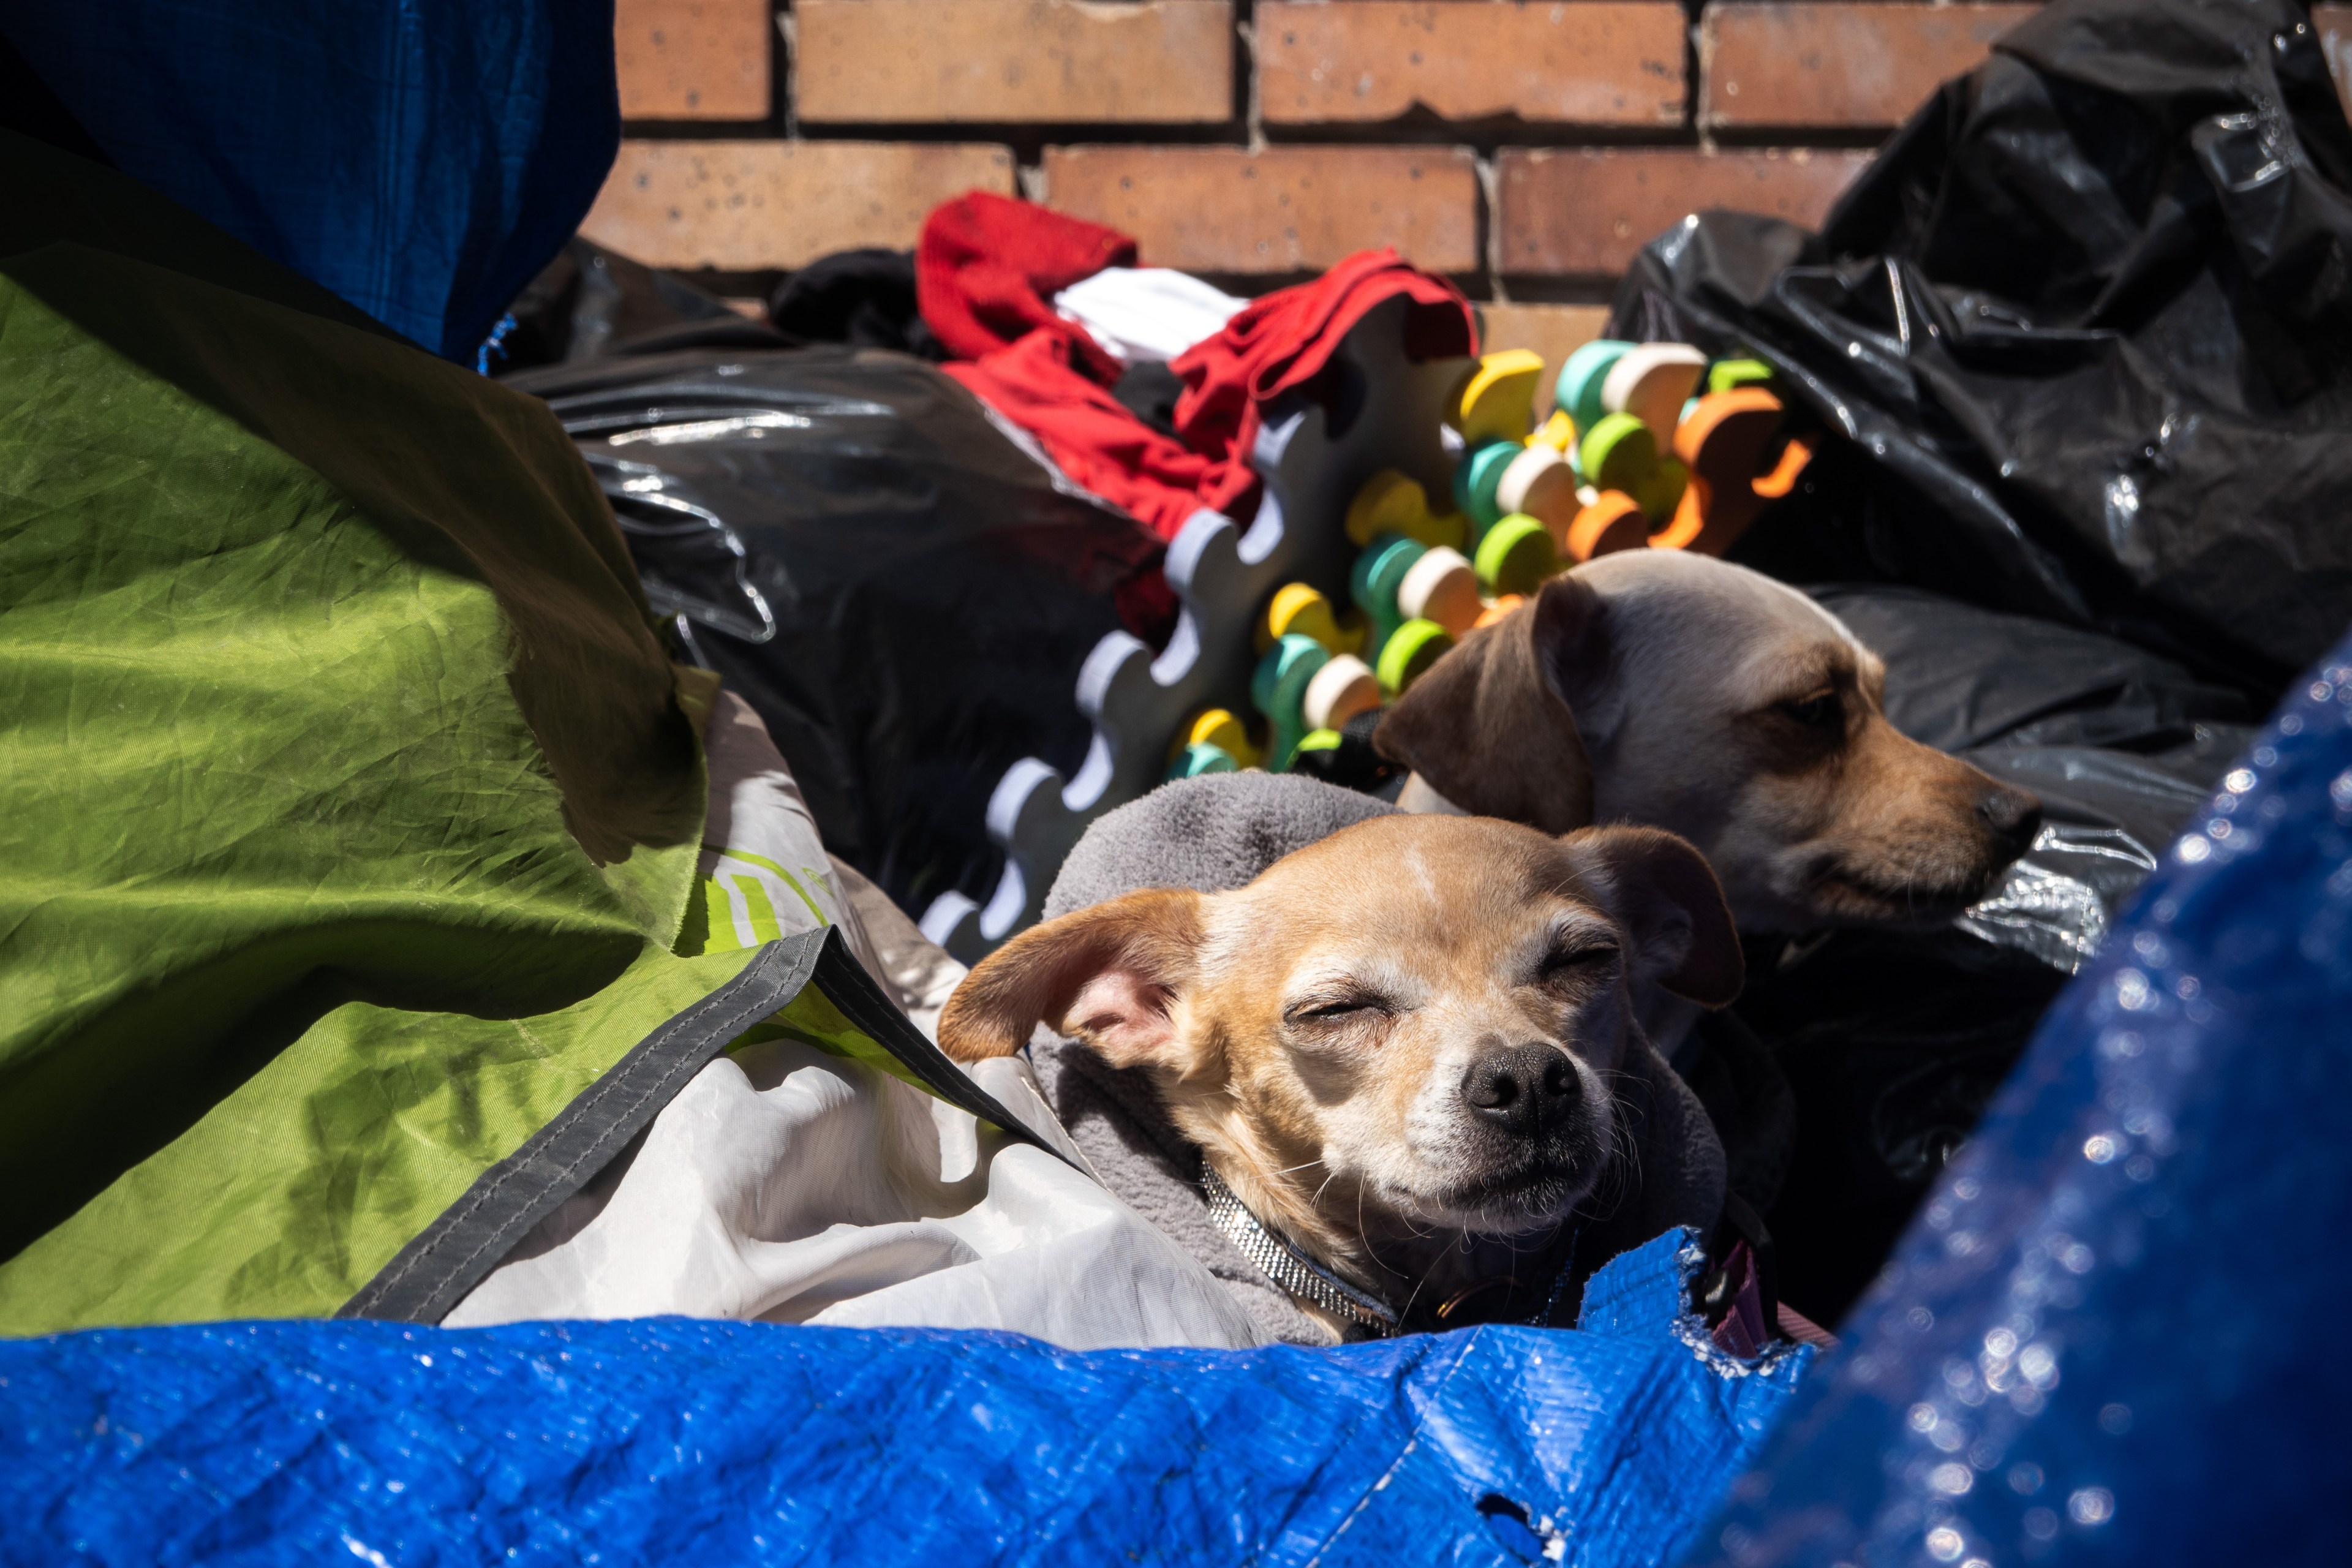 Two dogs rest amid colorful clutter, one with eyes closed, soaking up the sunlight.